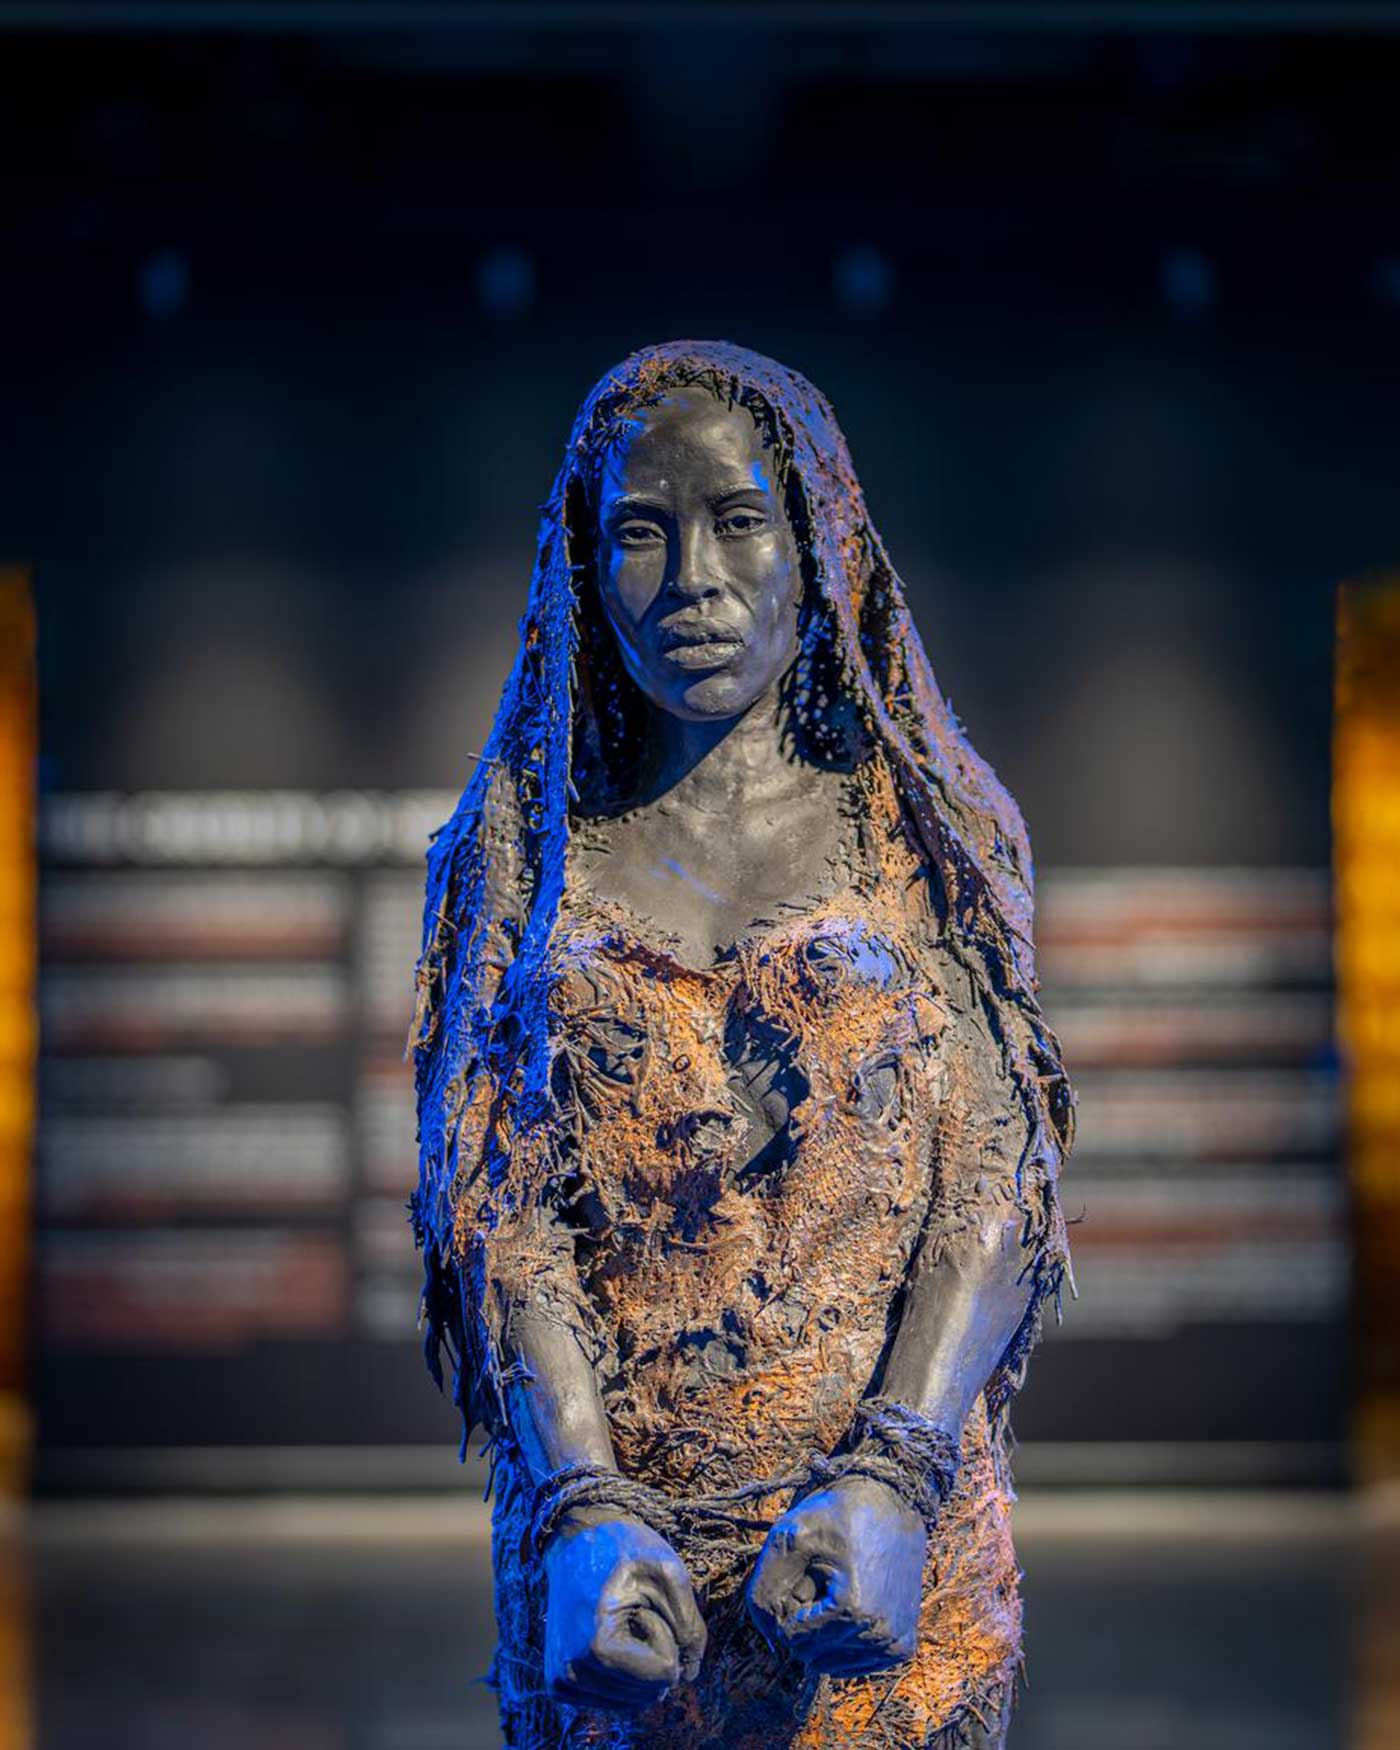 Sculpture of an enslaved woman with her wrists bound called Exode, No Home by Sandrine Plante in the Legacy Museum.